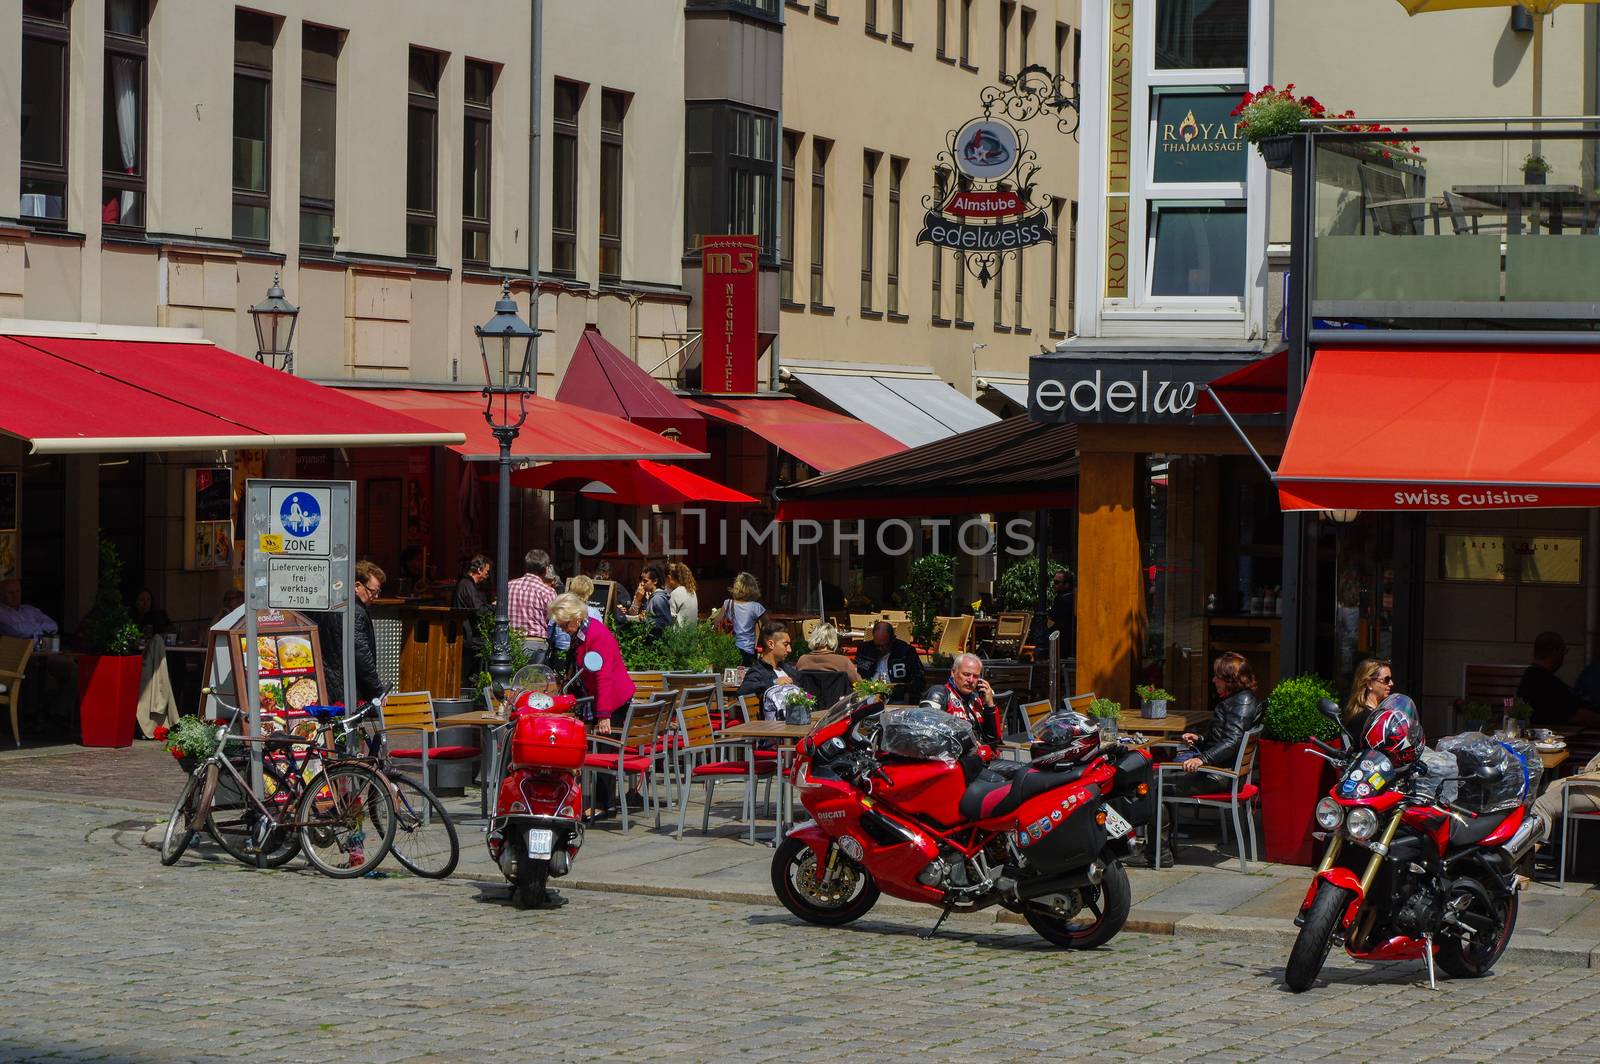 DRESDEN, GERMANY - SEPTEMBER 21, 2013: motorbikes in the cobblestone alley, is lined with many of Dresdens most famous restaurants and cafes. by evolutionnow